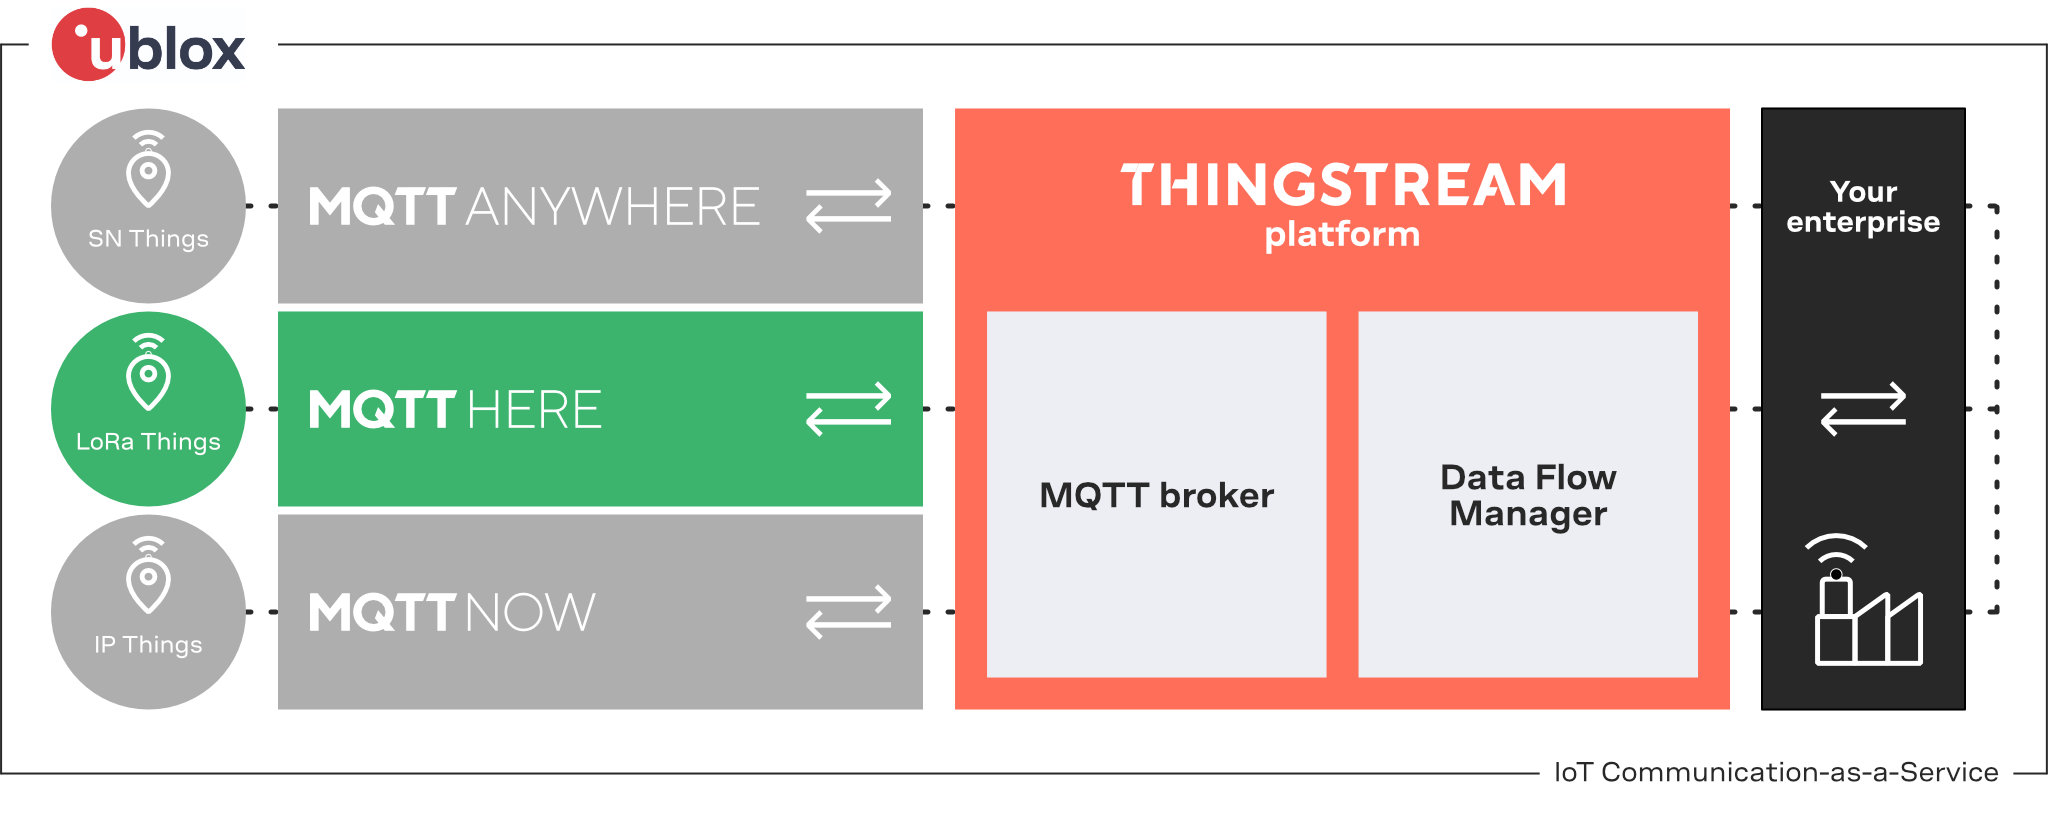 MQTT Here IoT Connectivity-as-a-Service for LoRaWAN devices